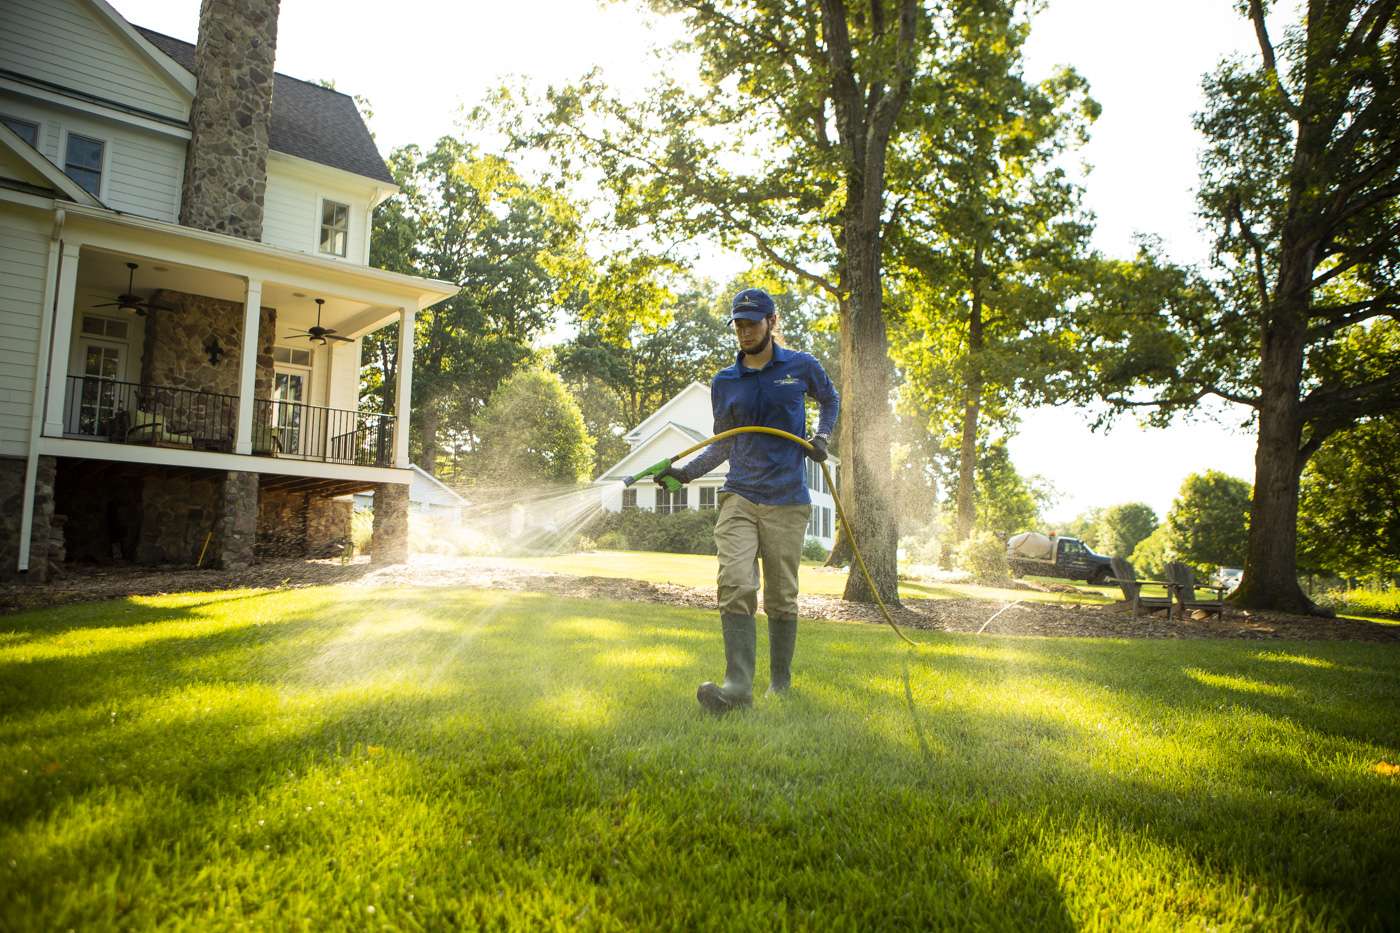 10 Character Traits That are Perfect for New Lawn Care or Landscaping  Careers